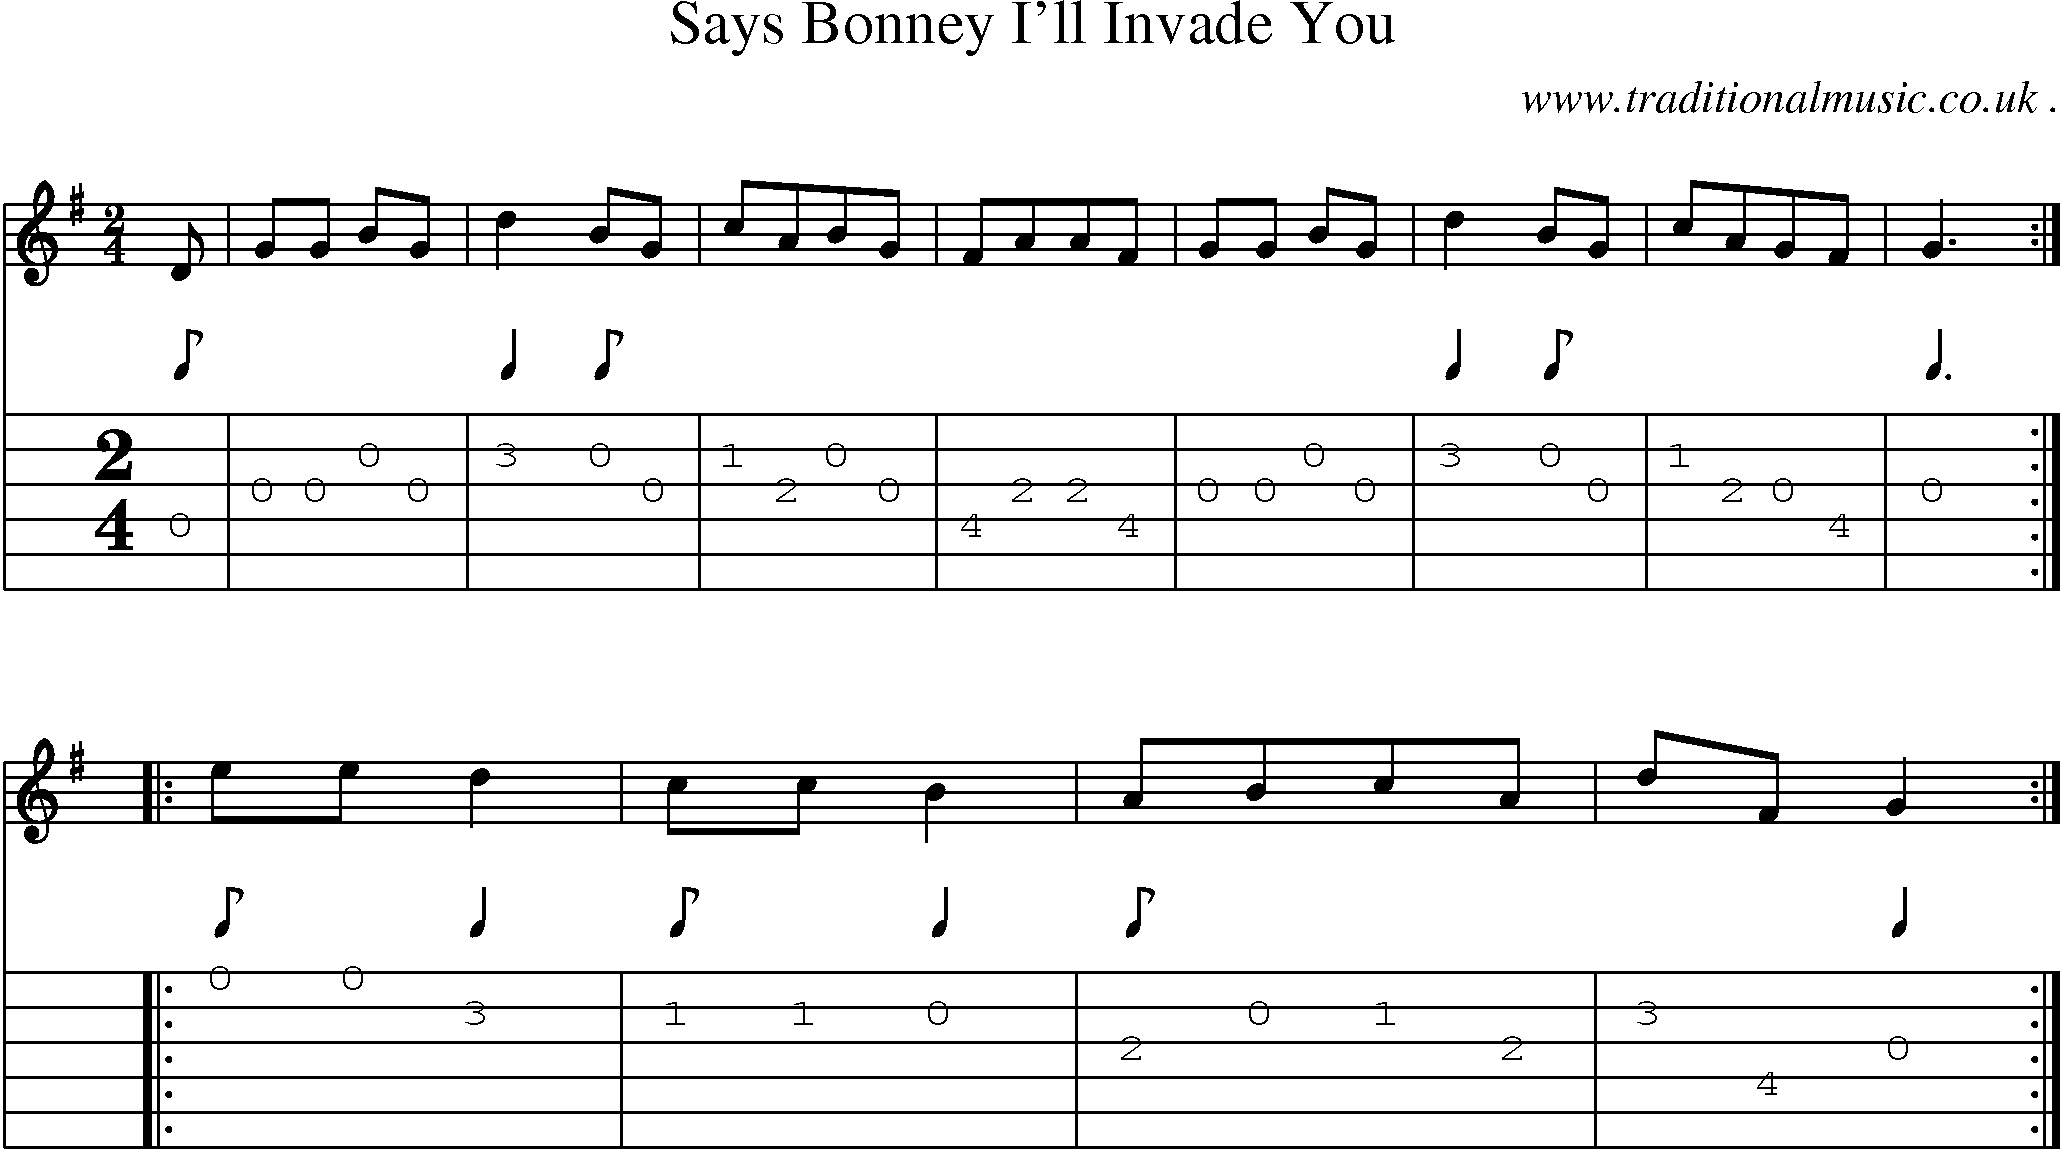 Sheet-Music and Guitar Tabs for Says Bonney Ill Invade You